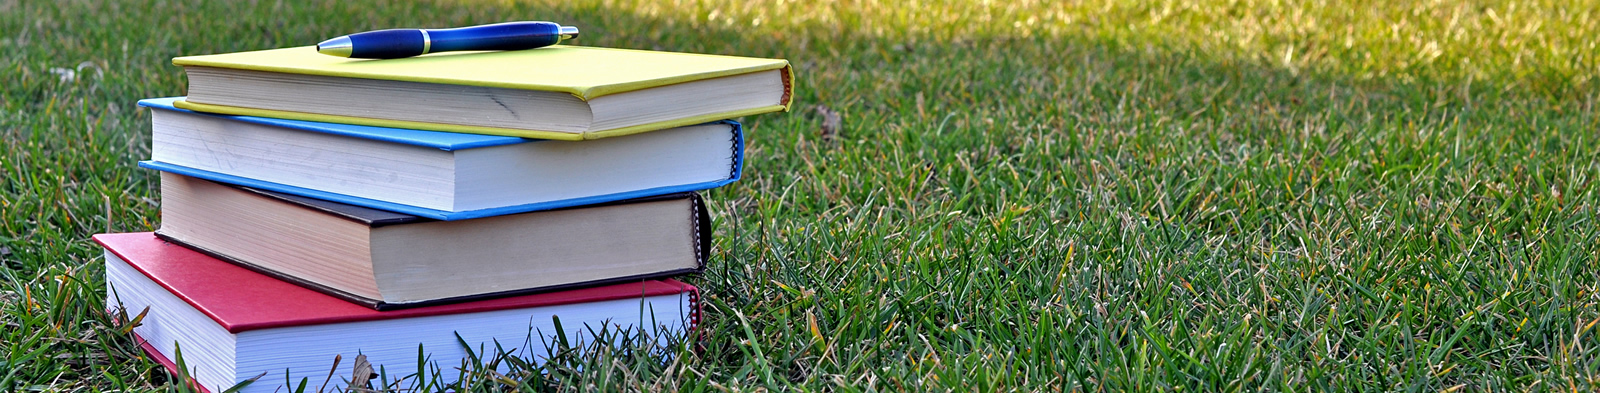 A pile of books on the grass